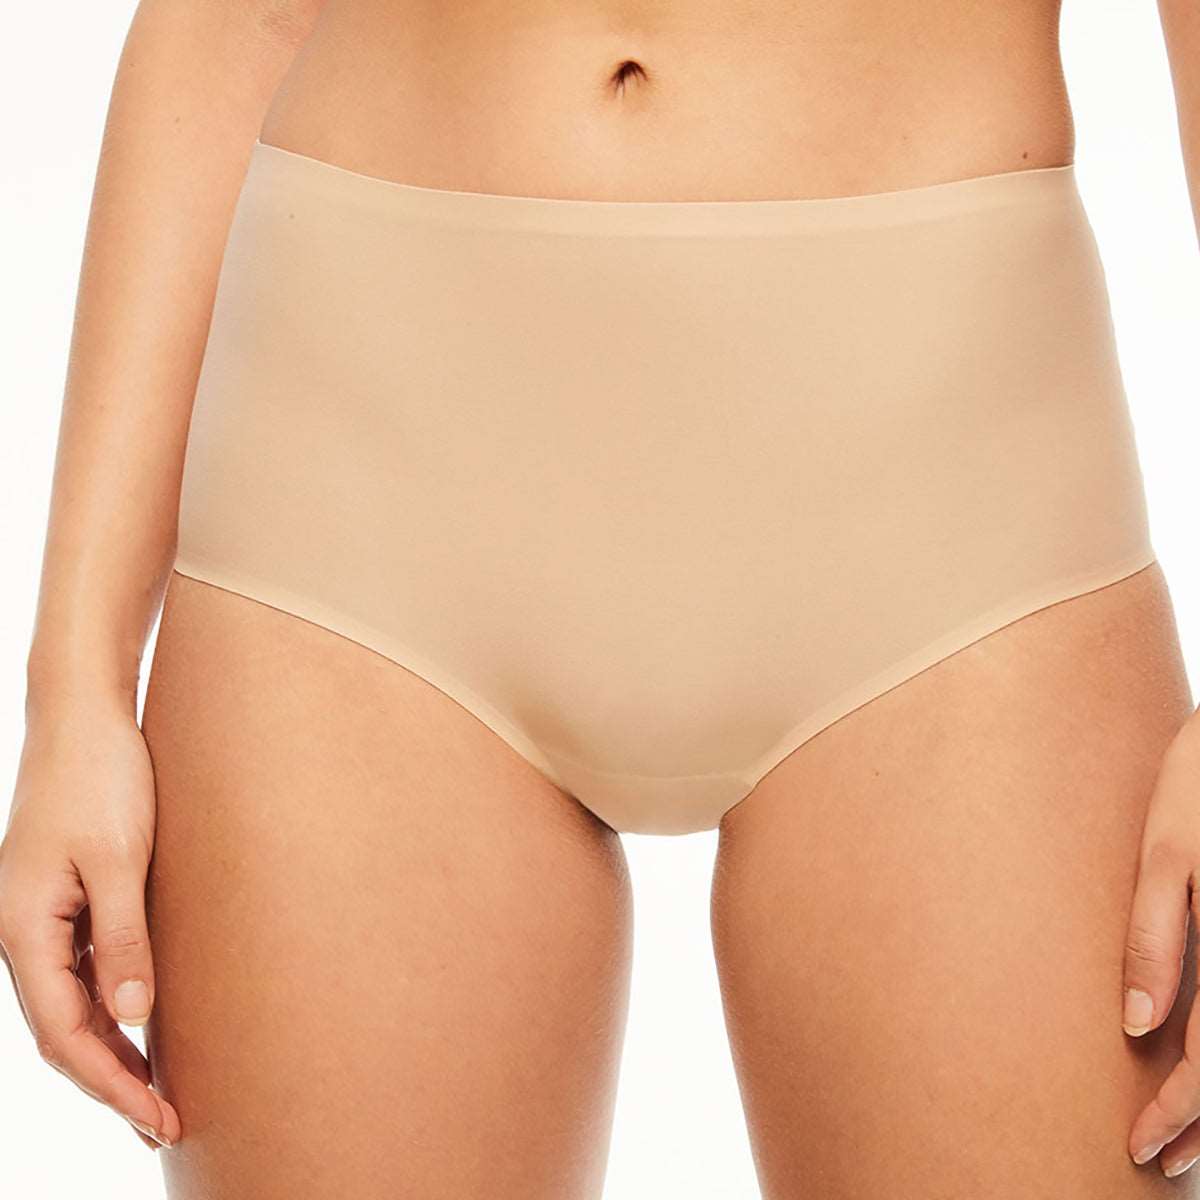 Chantelle Soft Stretch Brief 2647 in nude beige cafe seamless panty lingerie canada linea intima